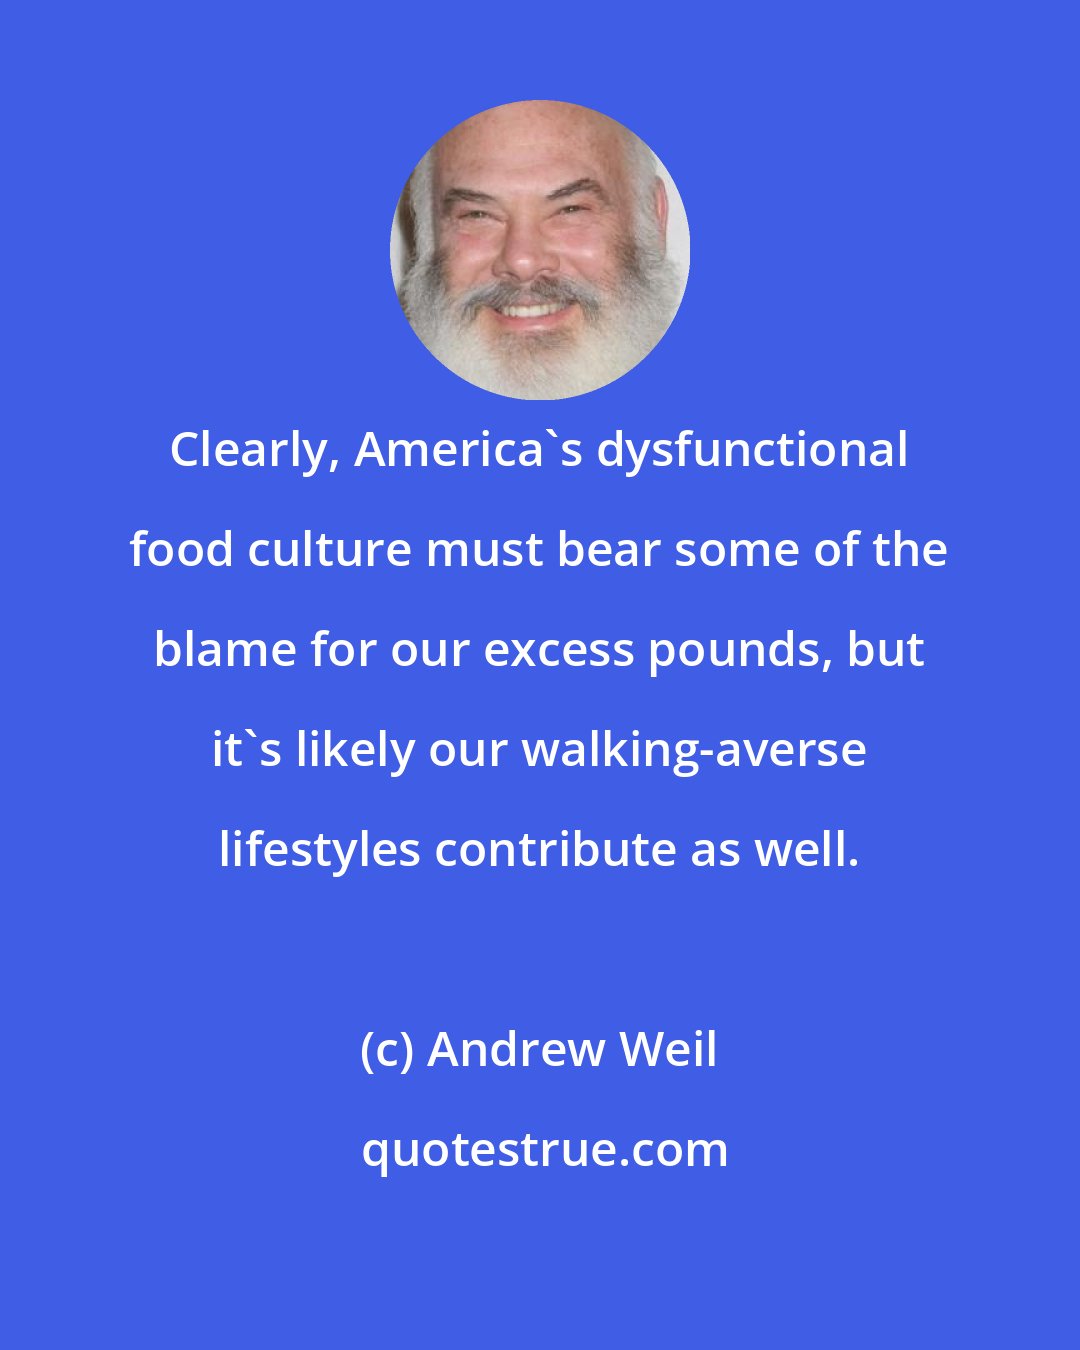 Andrew Weil: Clearly, America's dysfunctional food culture must bear some of the blame for our excess pounds, but it's likely our walking-averse lifestyles contribute as well.